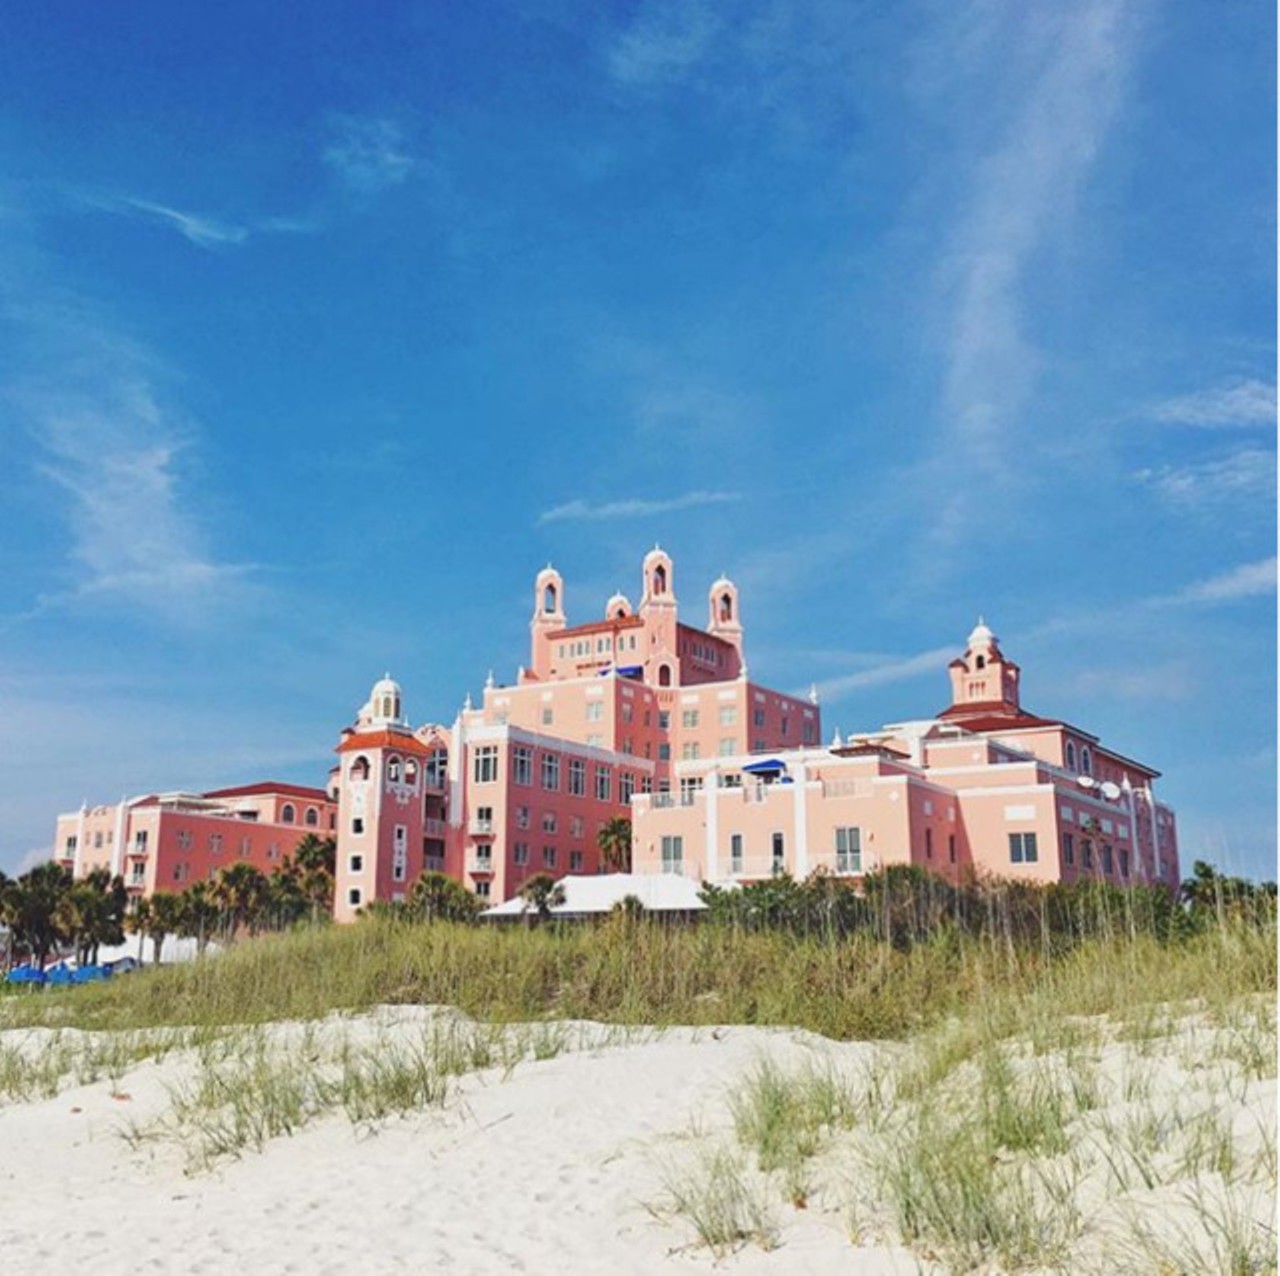   Relax at the massive pink landmark that is the Don CeSar 
The Don CeSar, 3400 Gulf Blvd, St Pete Beach, 727-360-1881
The Don CeSar, the unmistakable pink palace of St. Pete Beach, offers a luxurious stay, beautiful view of St. Pete Beach, and features a number of indulgent treatments and amenities in their Spa Oceana. Their beautiful rooftop terrace overlooking the Gulf of Mexico will have all of your visitors taking pictures at sunset. The Don CeSar is too iconic of a landmark for out-of-towners to skip on their site-seeing endeavors. 
Photo via  Don Cesar/Facebook